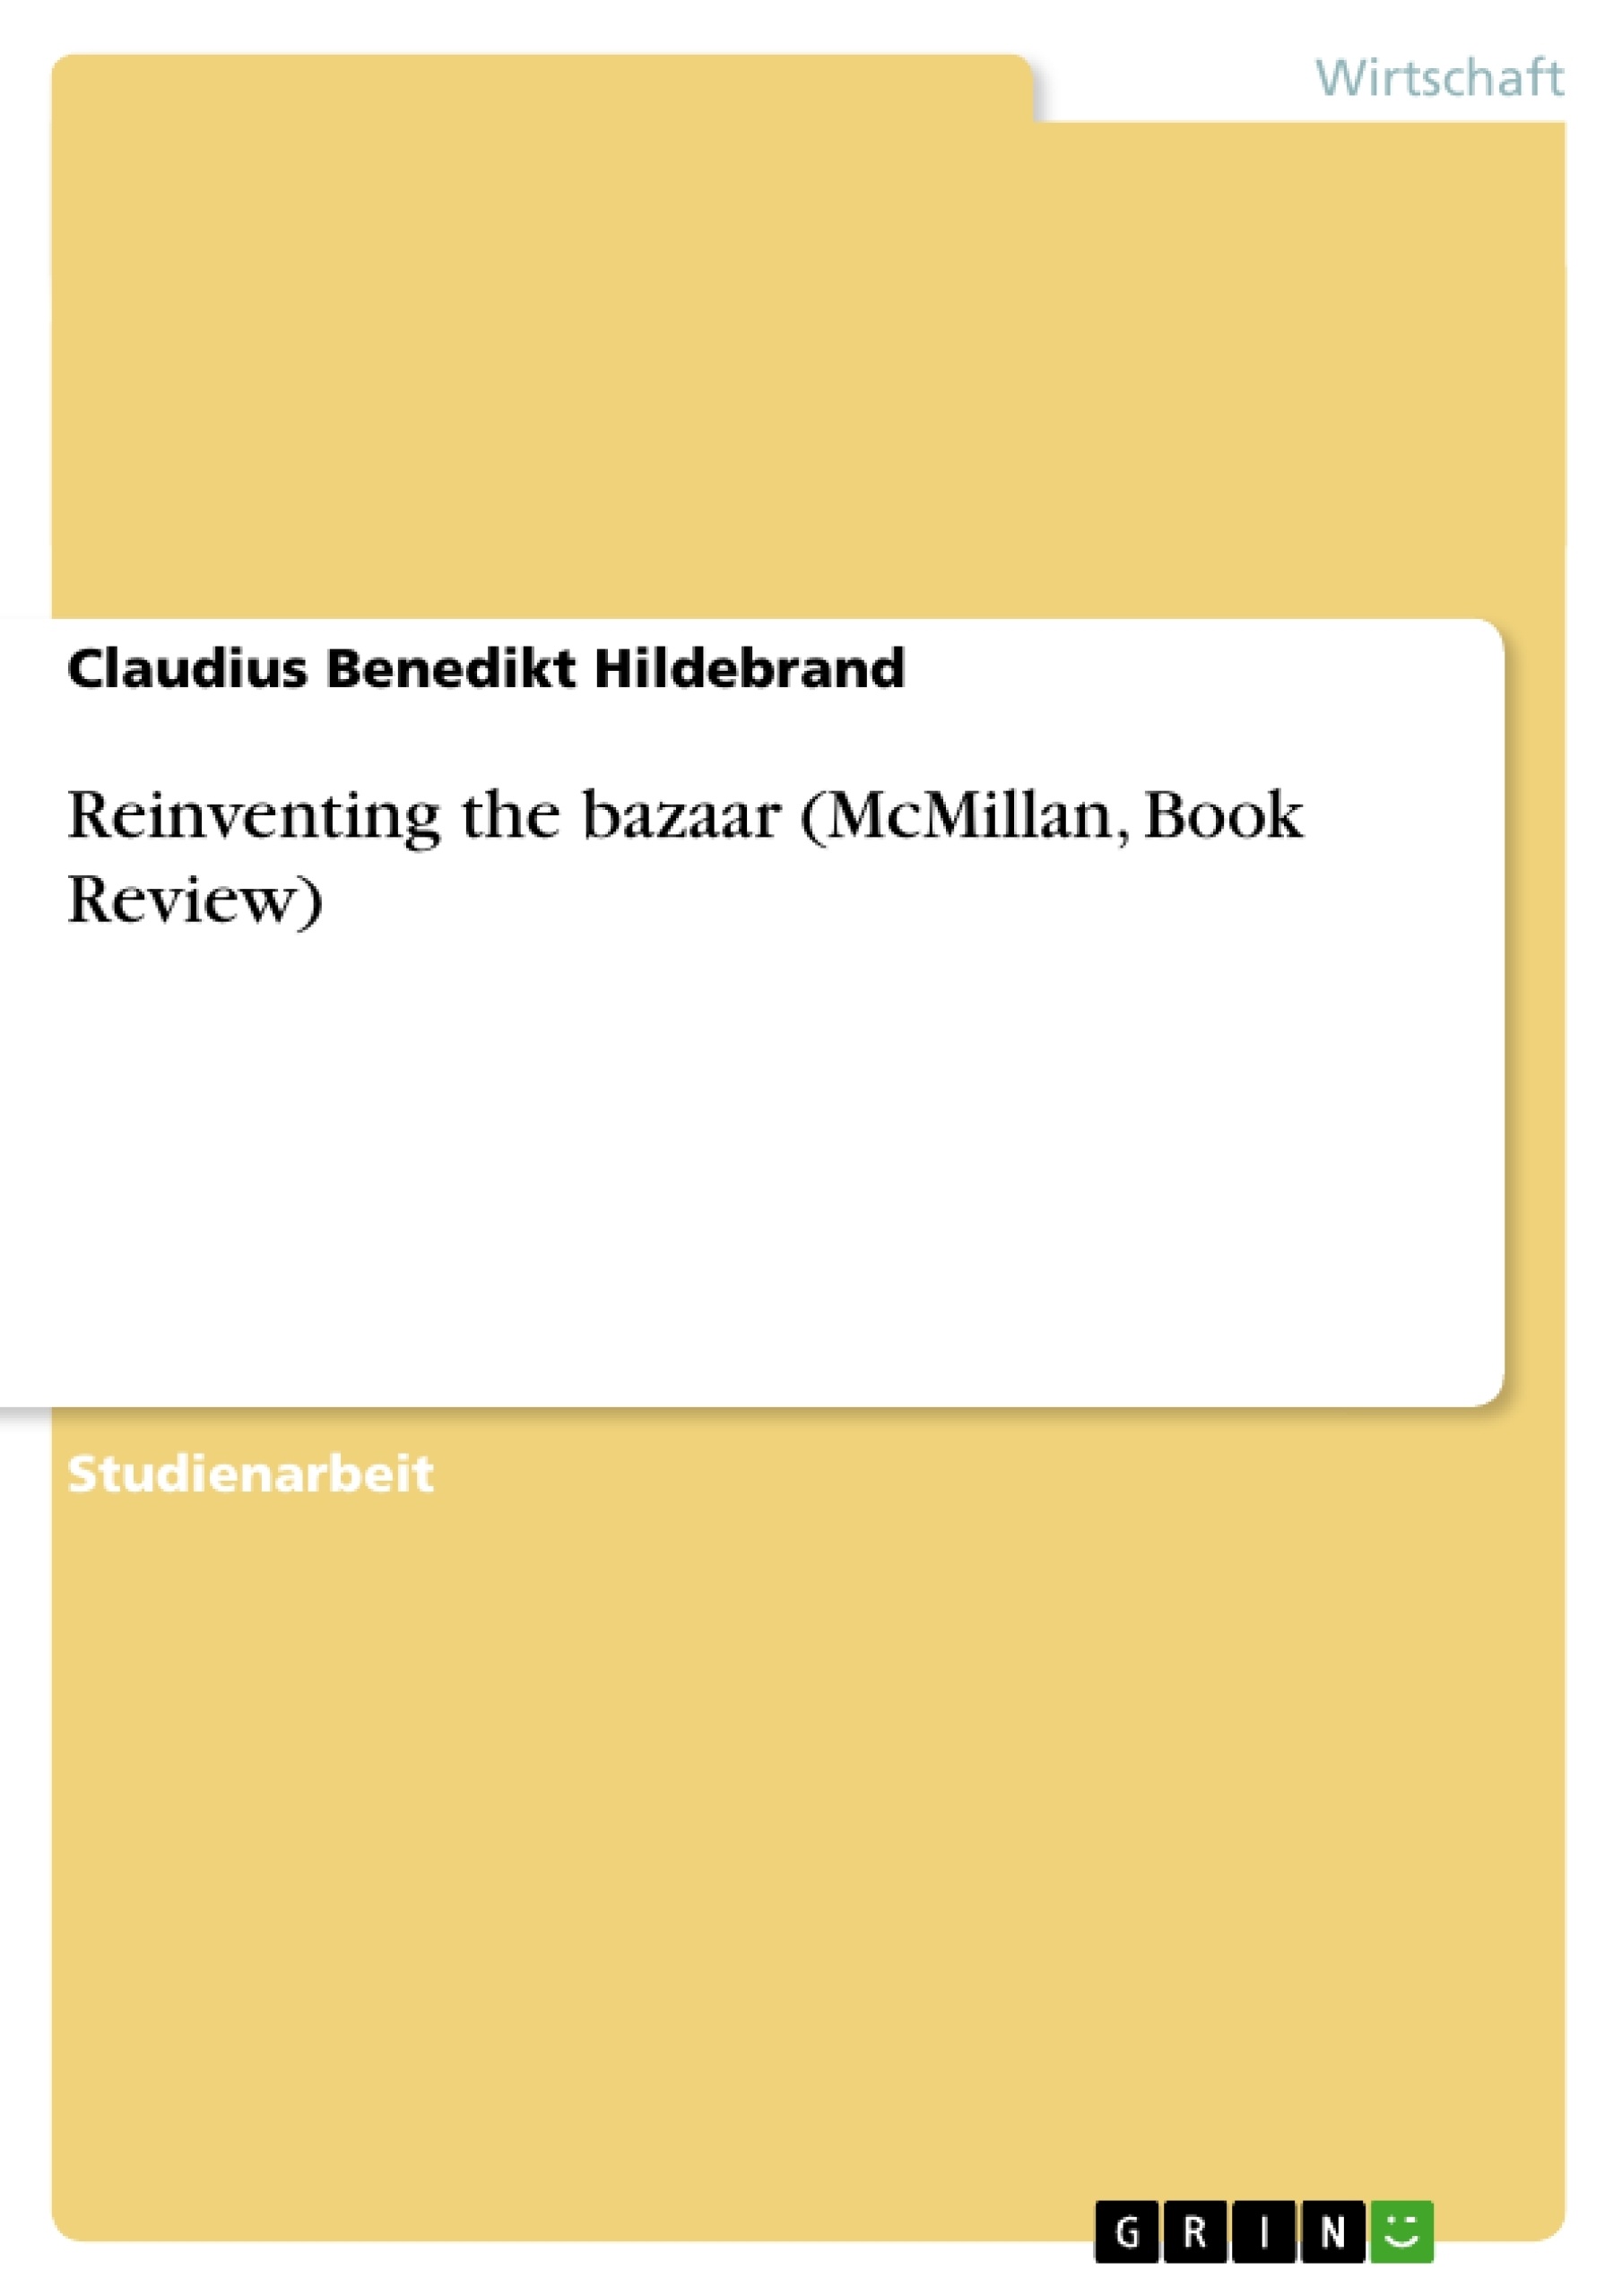 Titre: Reinventing the bazaar (McMillan, Book Review)